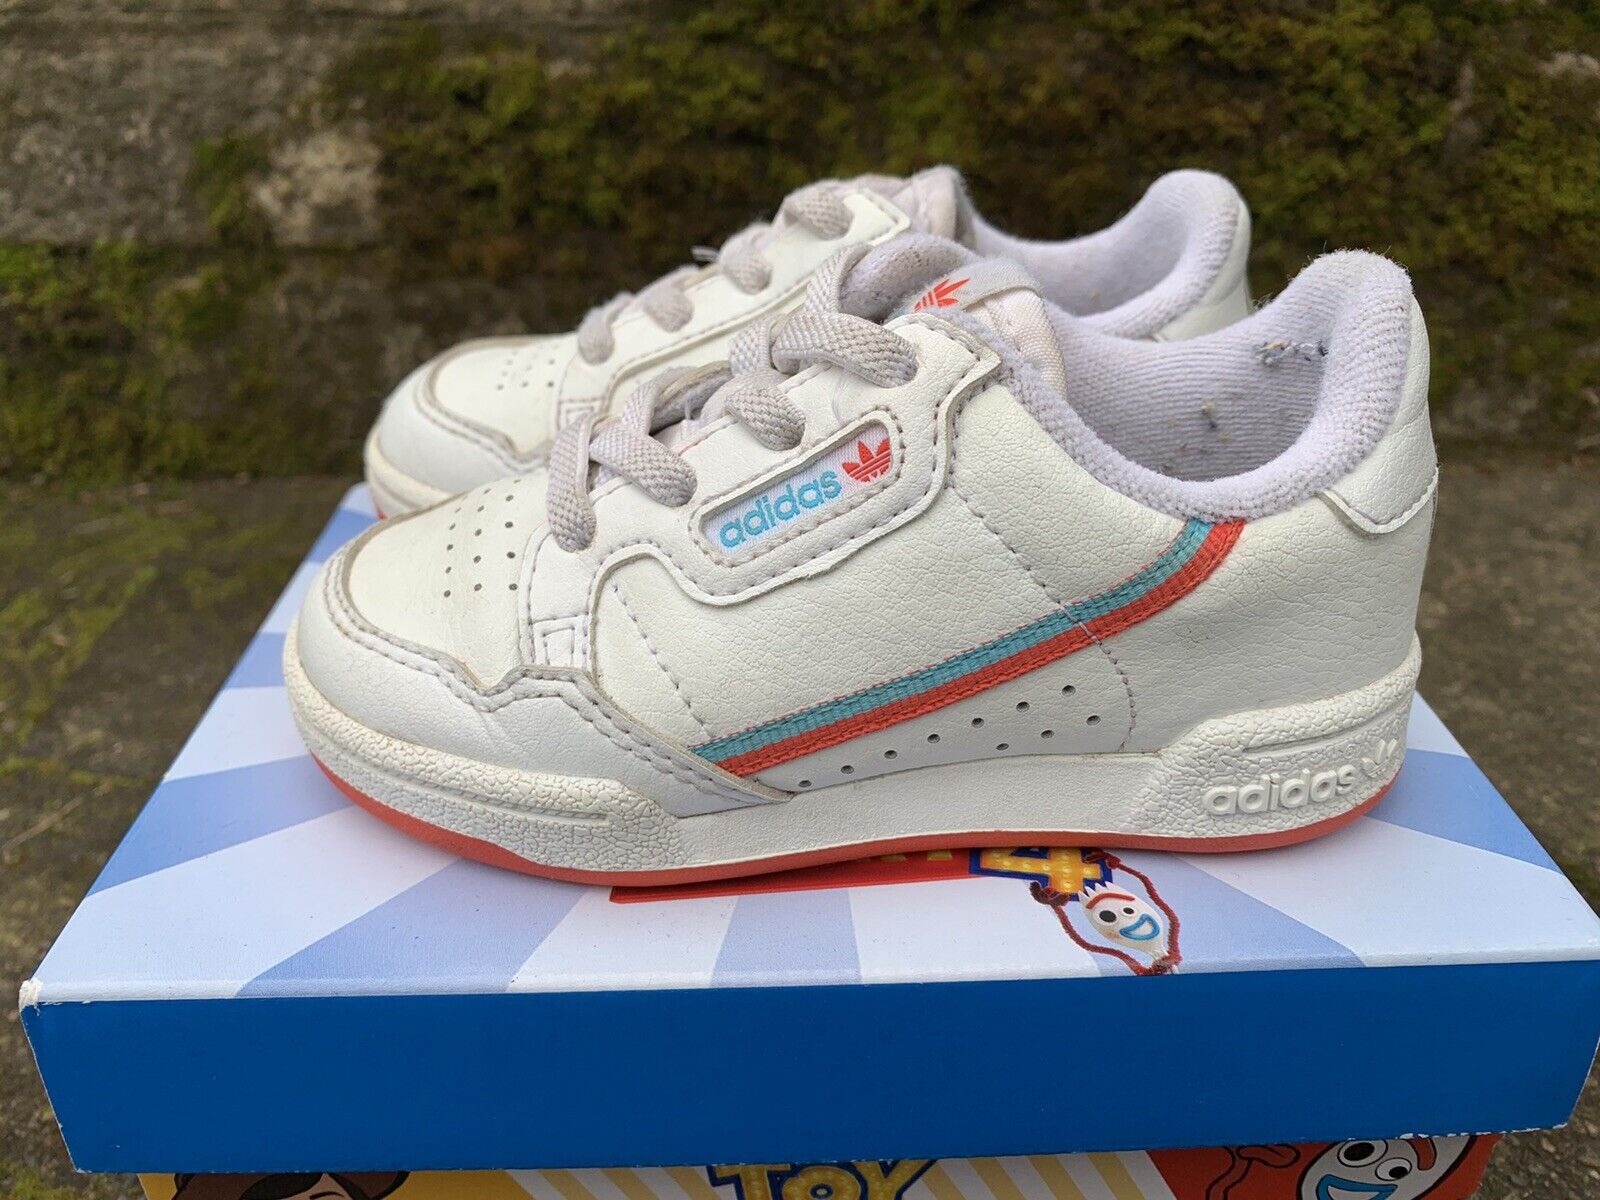 Adidas Continental 80, Toy Story 4, Forky, Infants Size 1k, Excellent Condition eBay